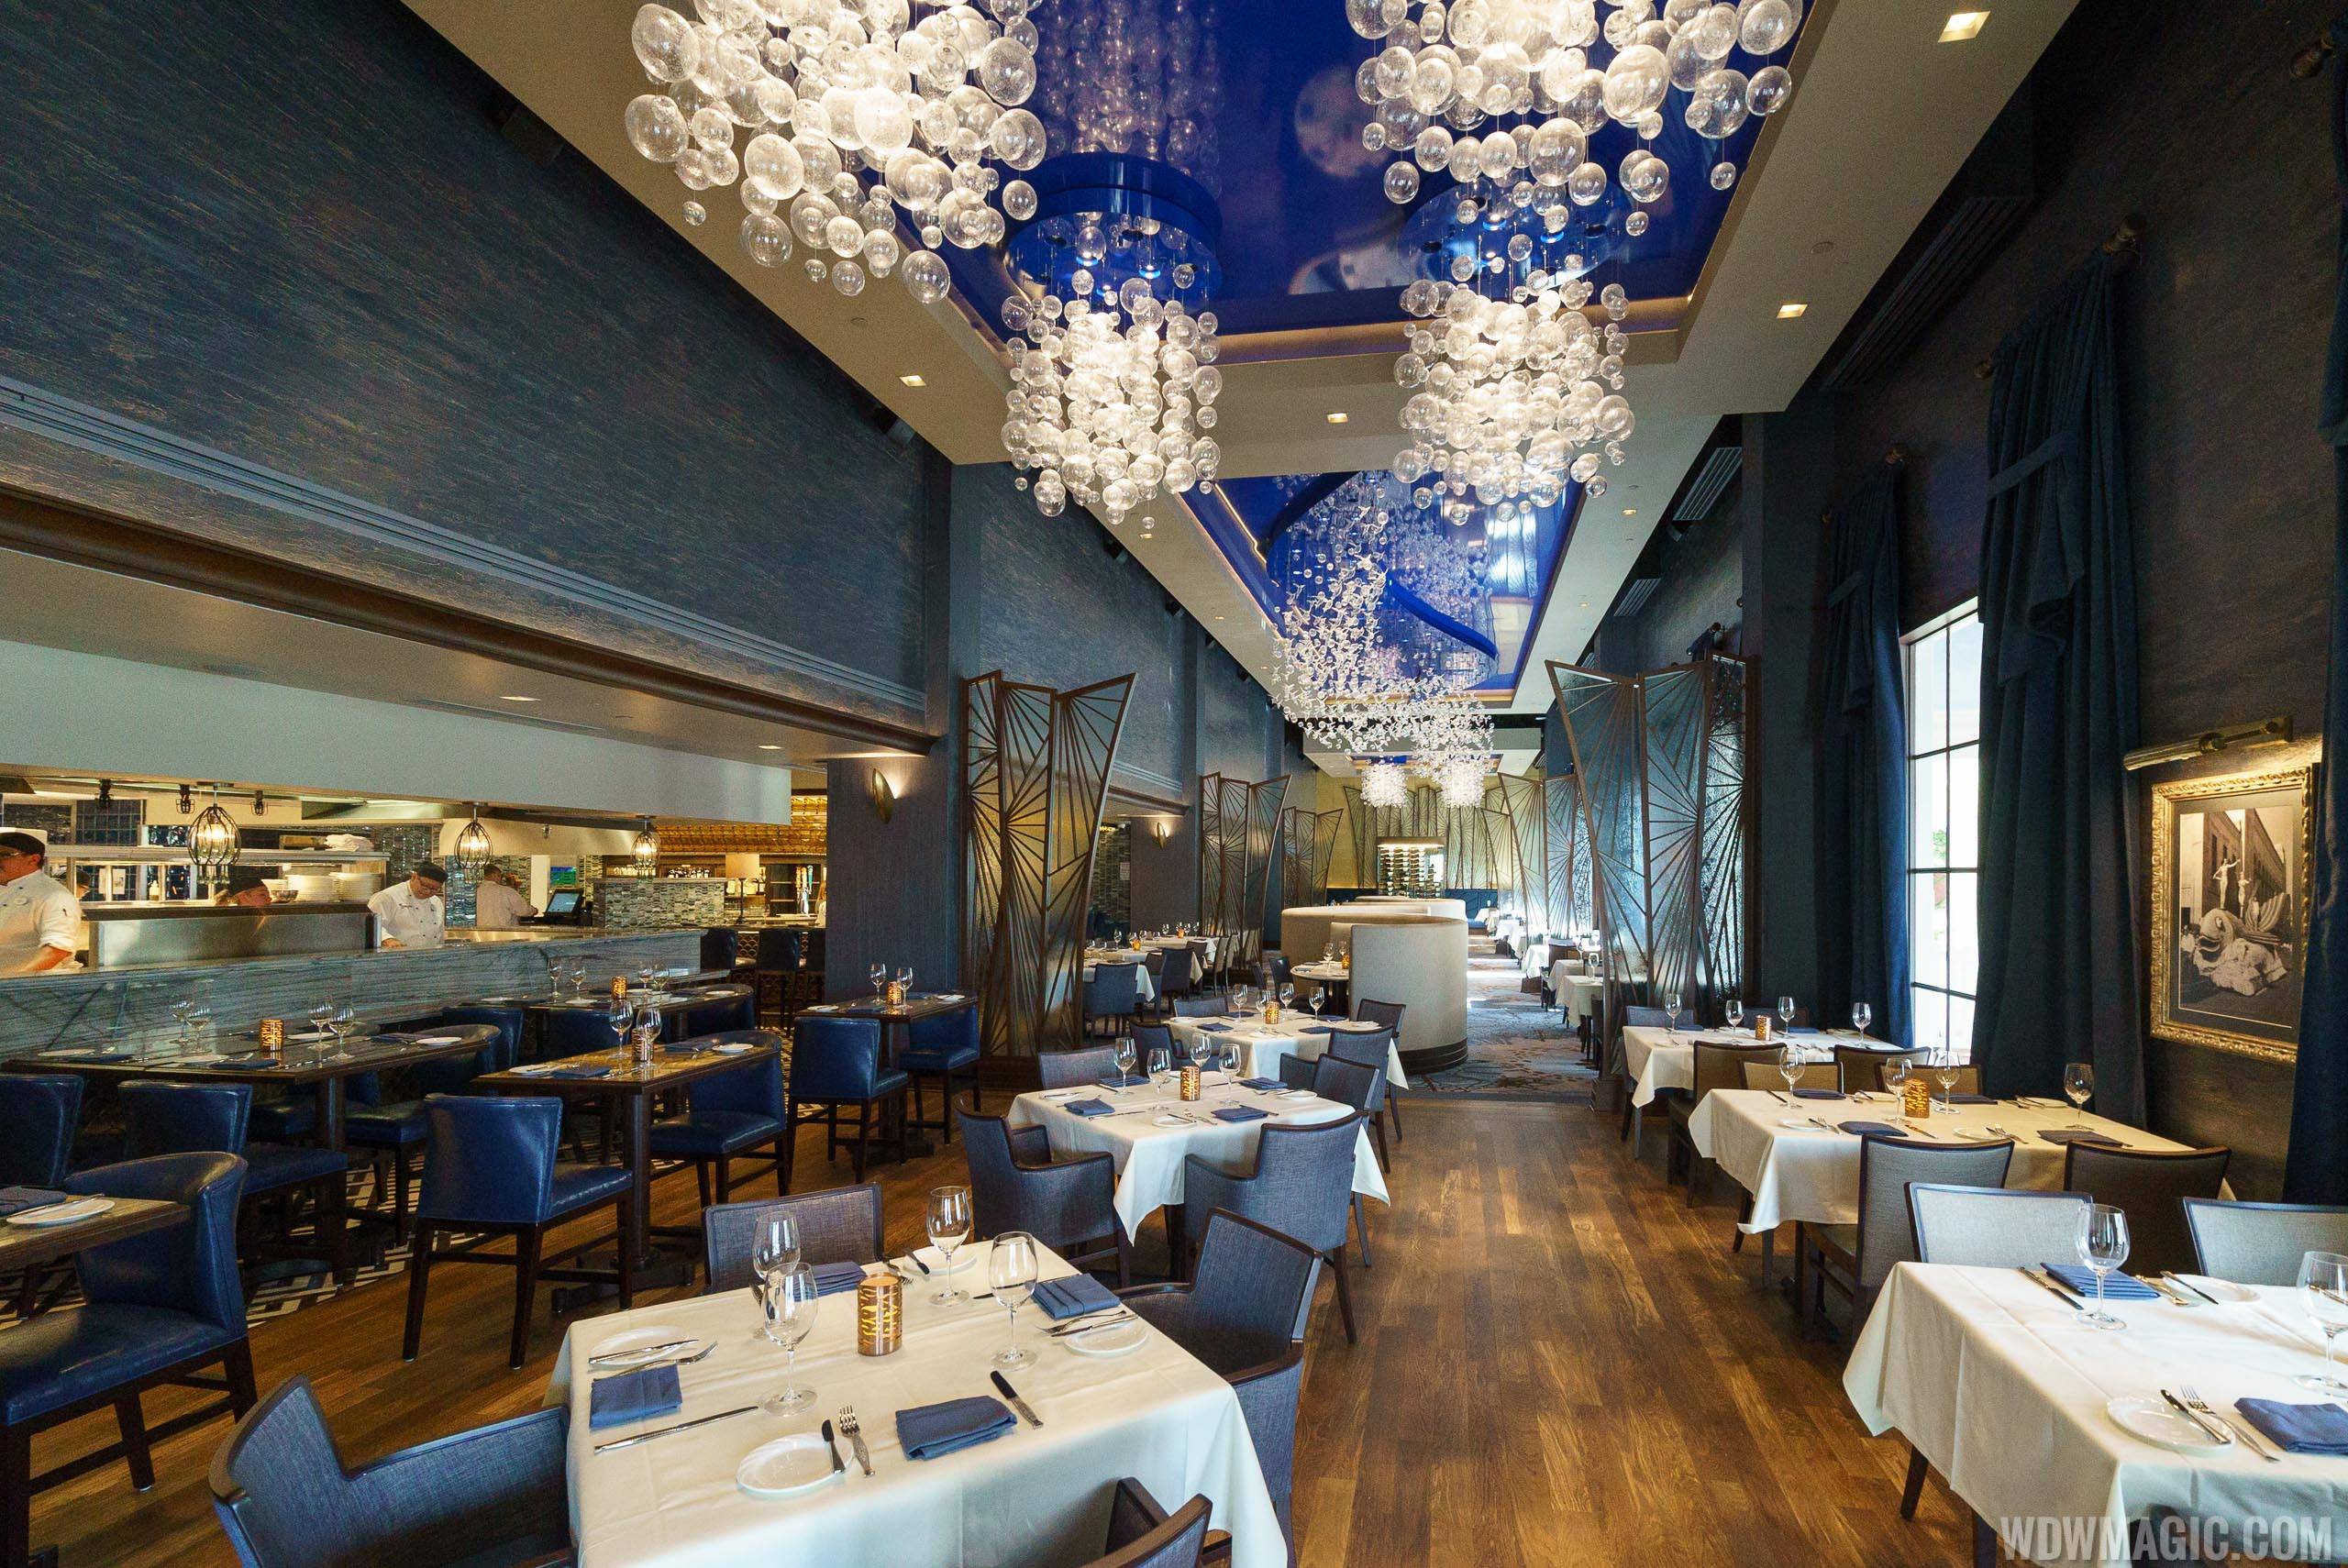 Reopening dates announced for Flying Fish, Jiko and Turf Club at Walt Disney World